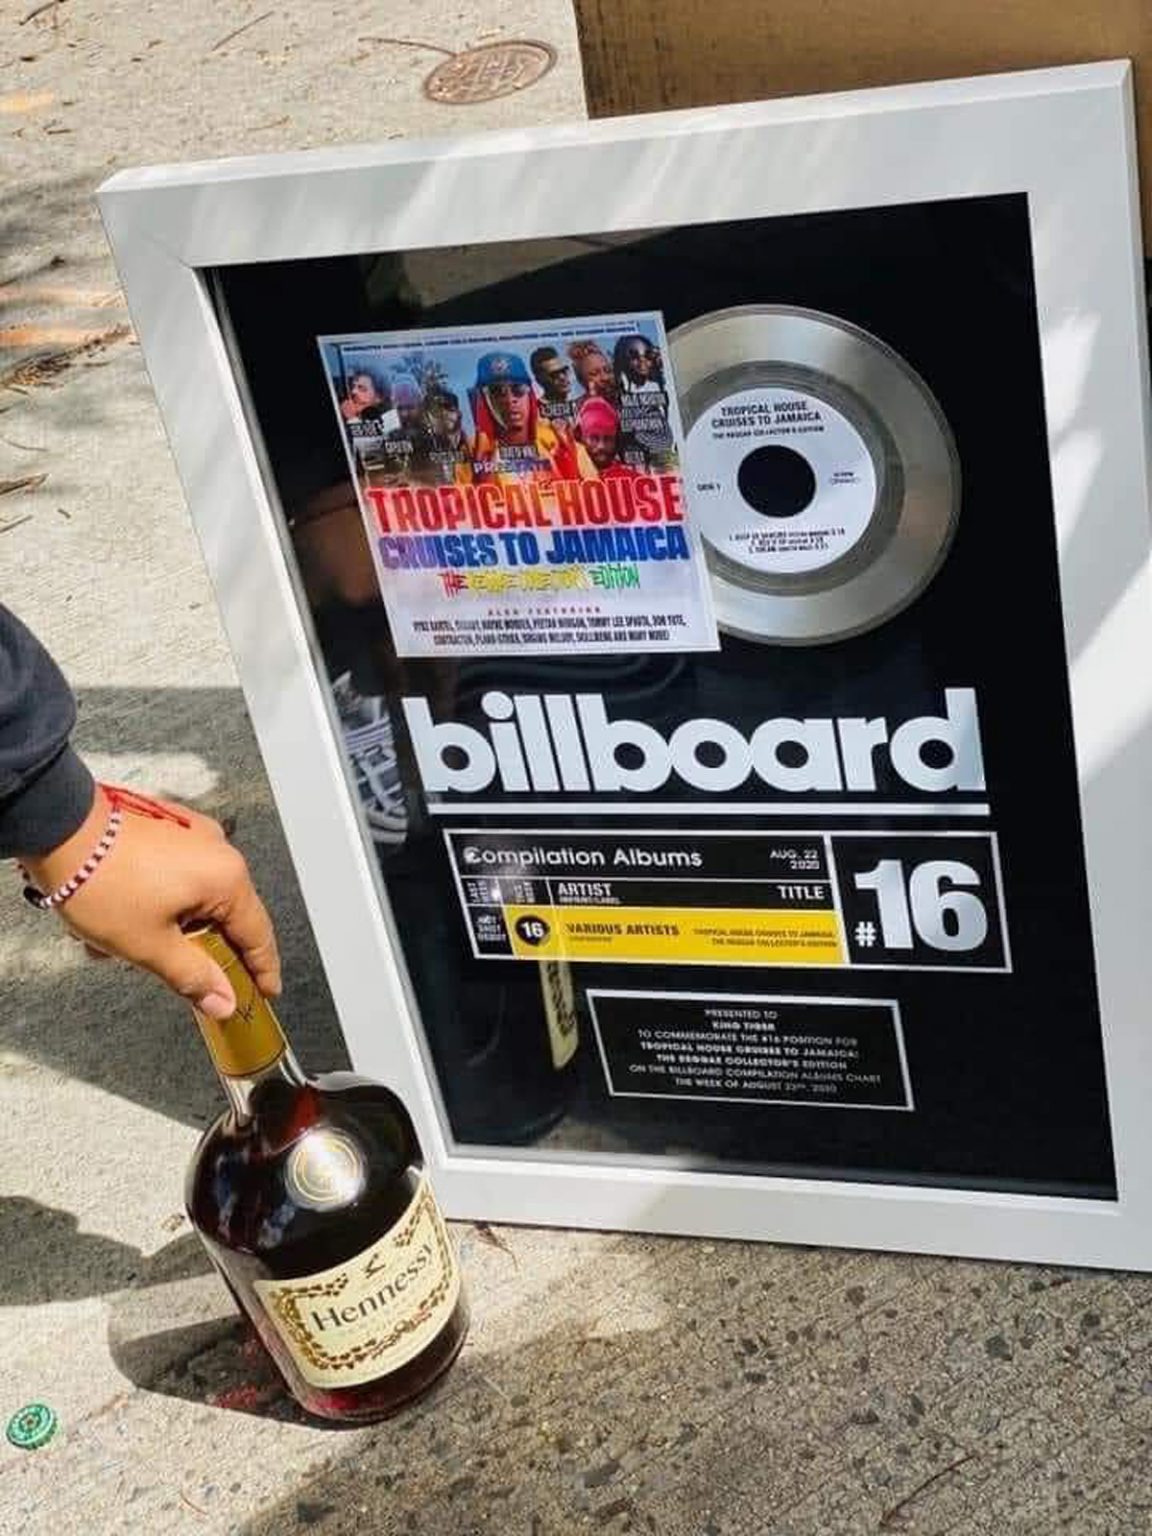 Billboard Plaque Rolls In For Contractor’s 'Tropical House Cruises To